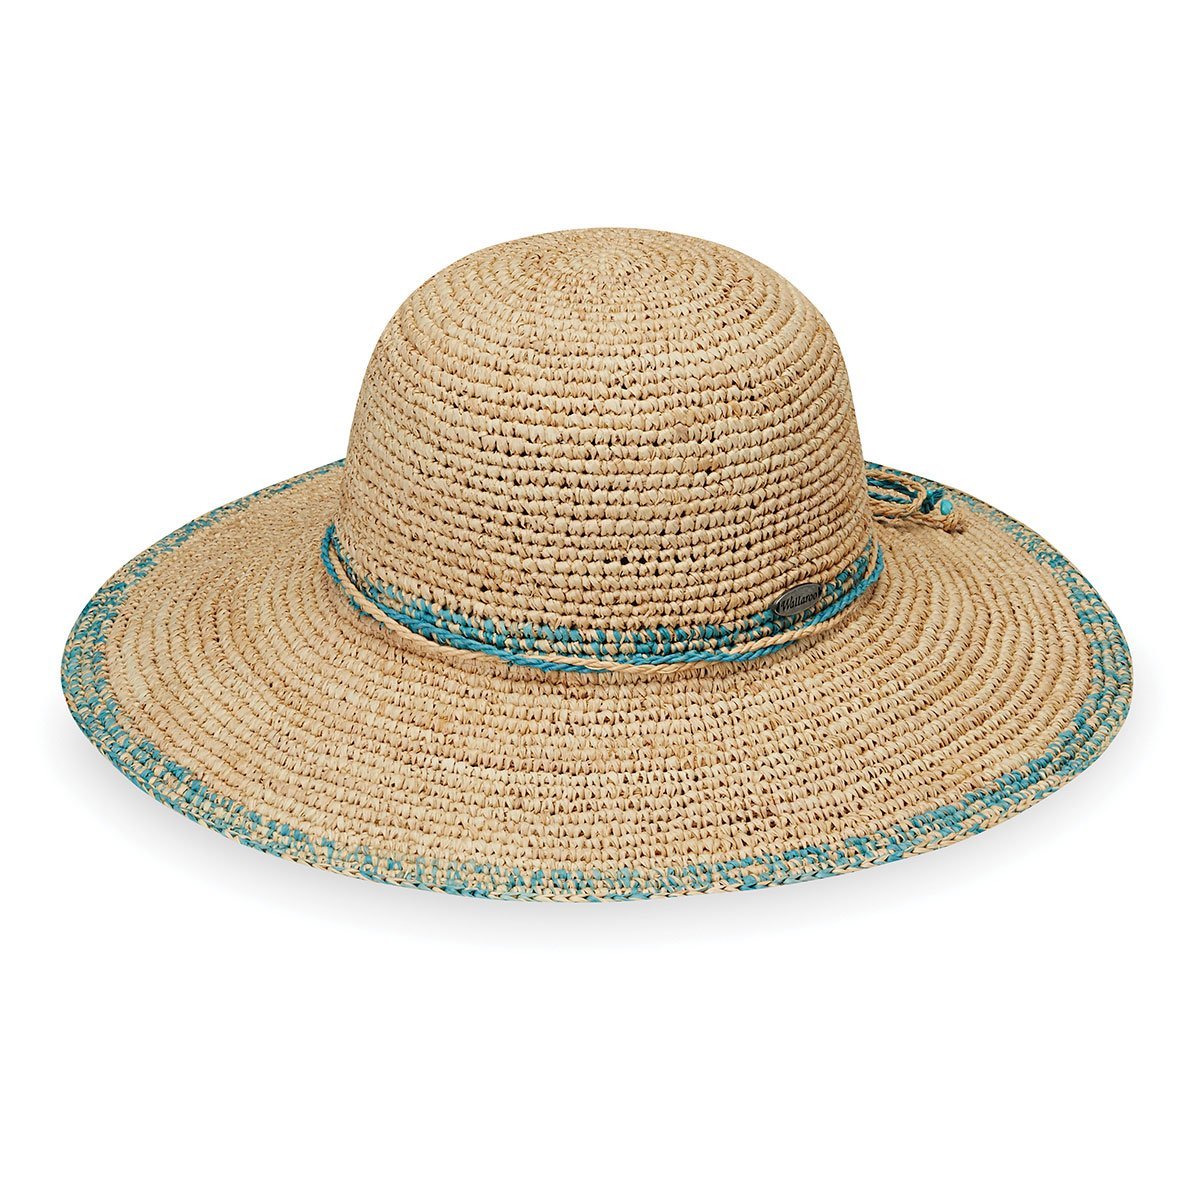 Featuring View of Big Wide Brim Camille Straw Sun Beach Hat in Turquoise from Wallaroo